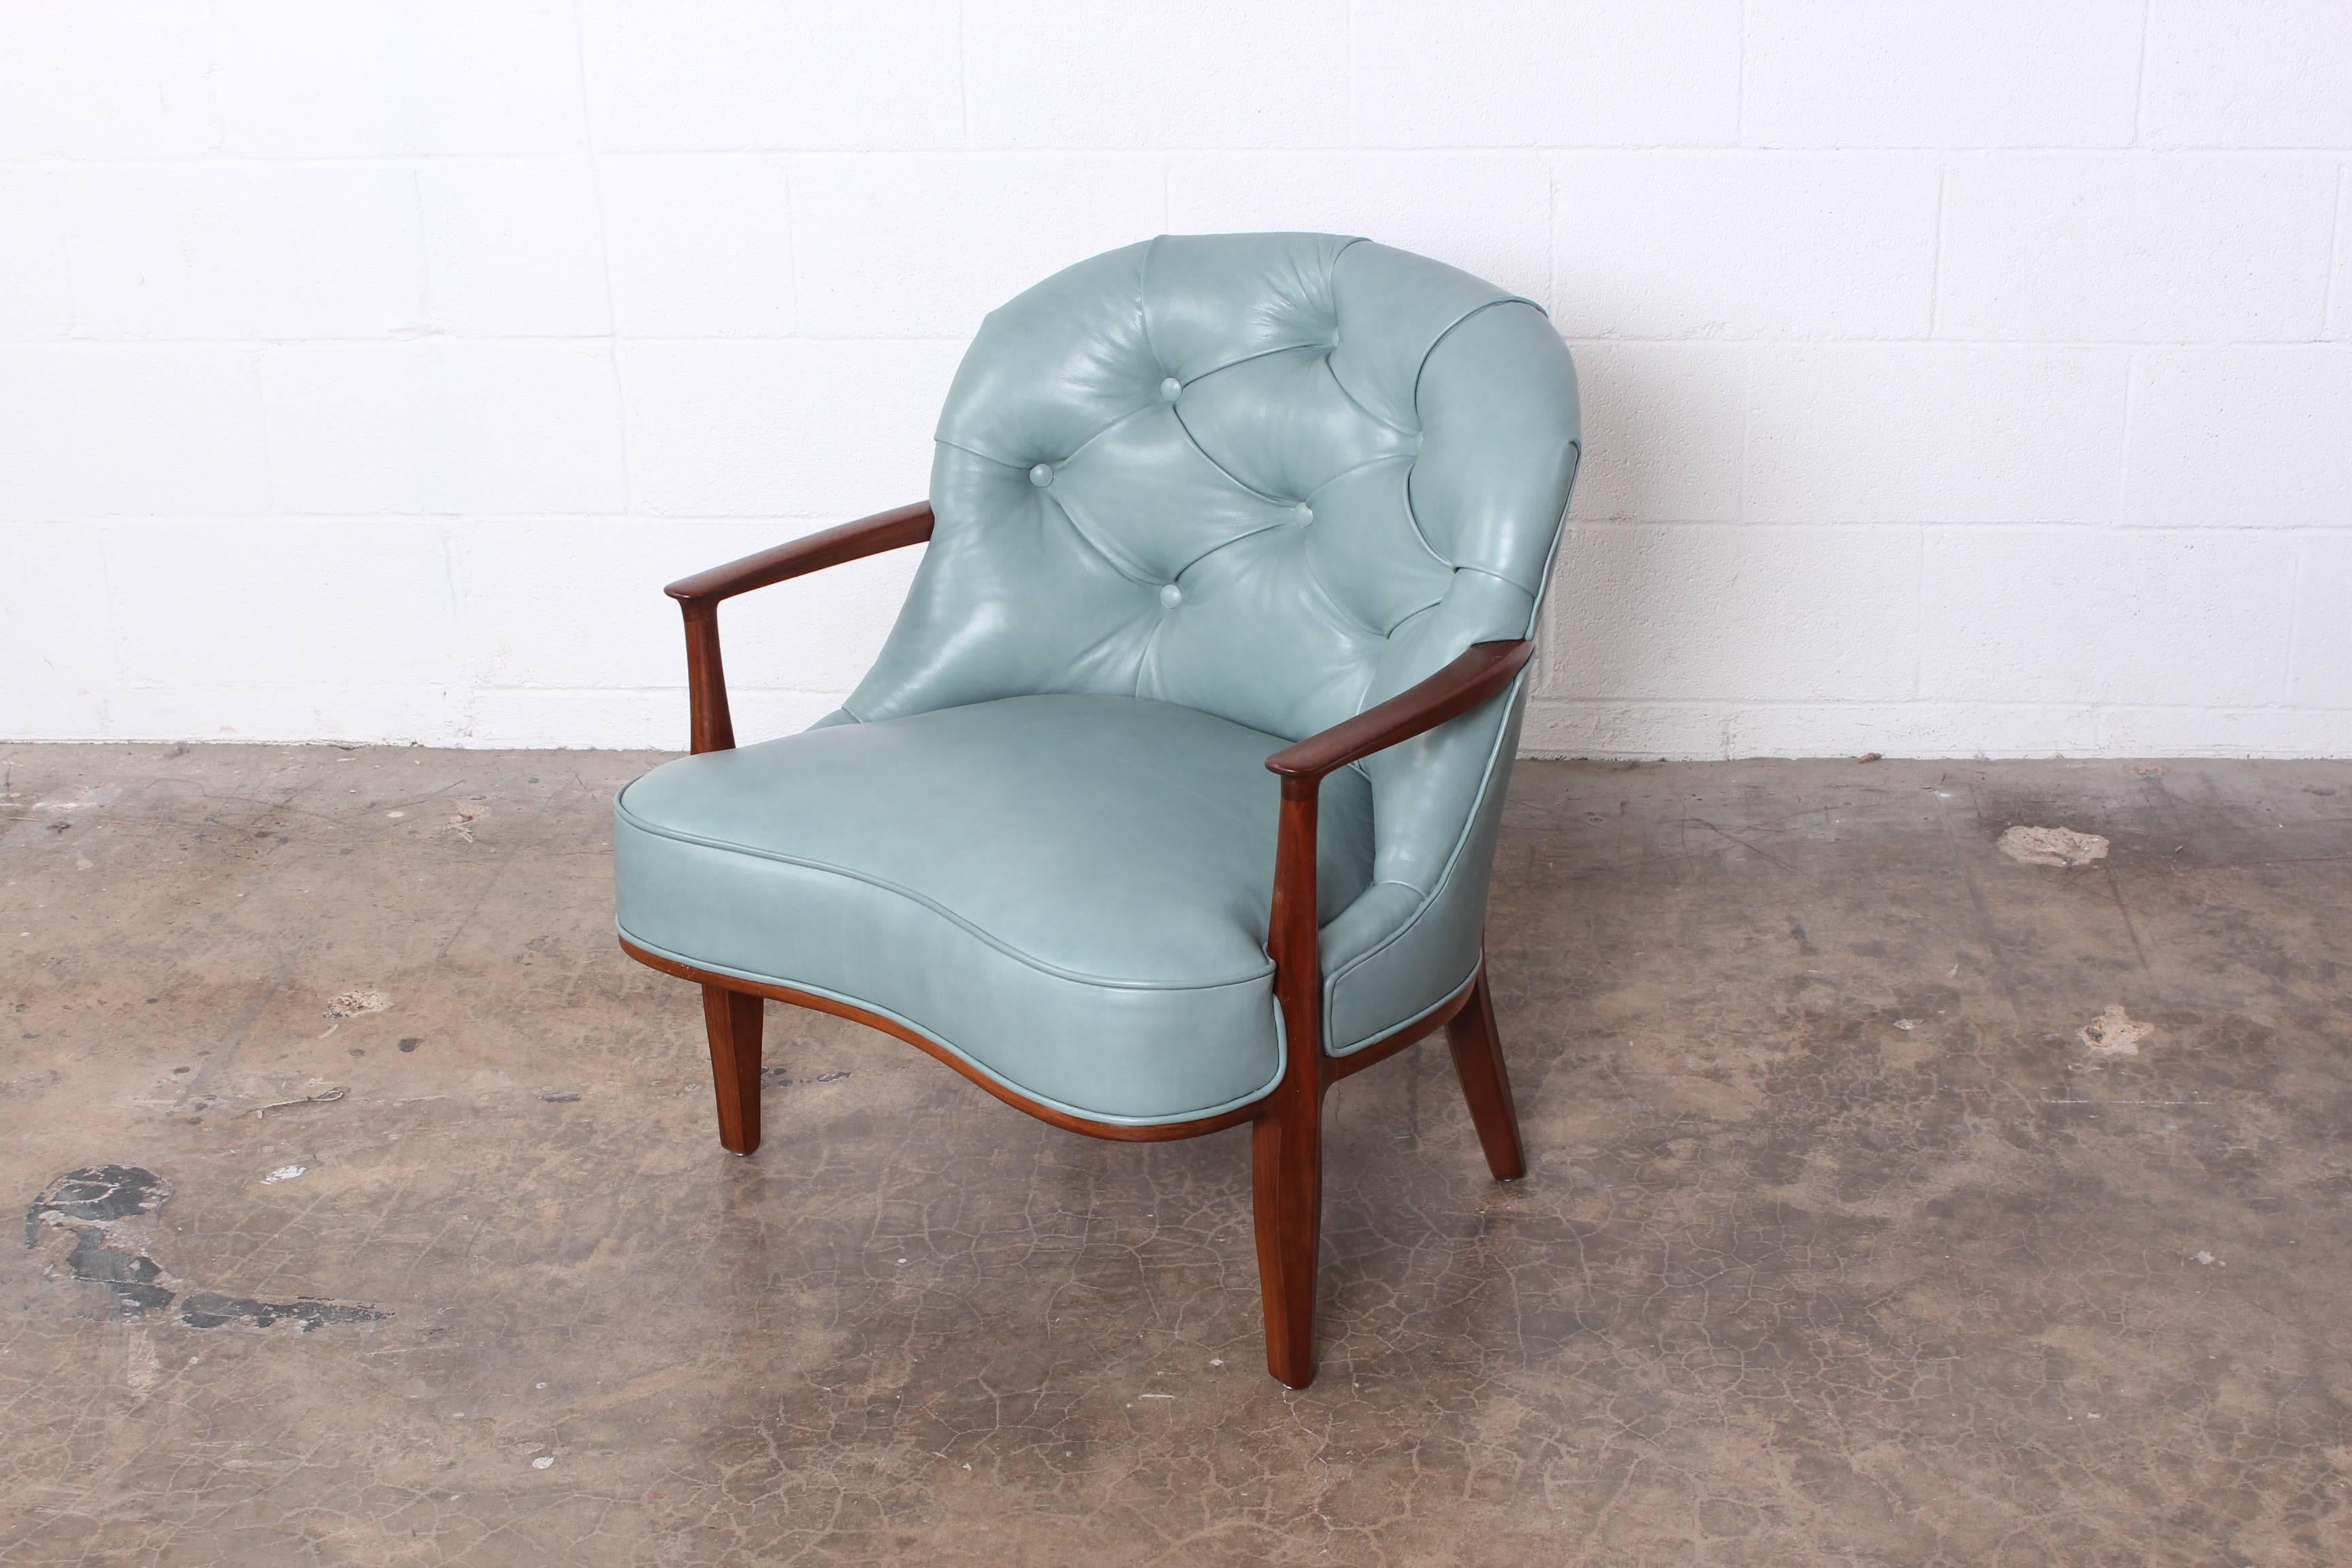 Mid-20th Century Janus Lounge Chair by Edward Wormley for Dunbar